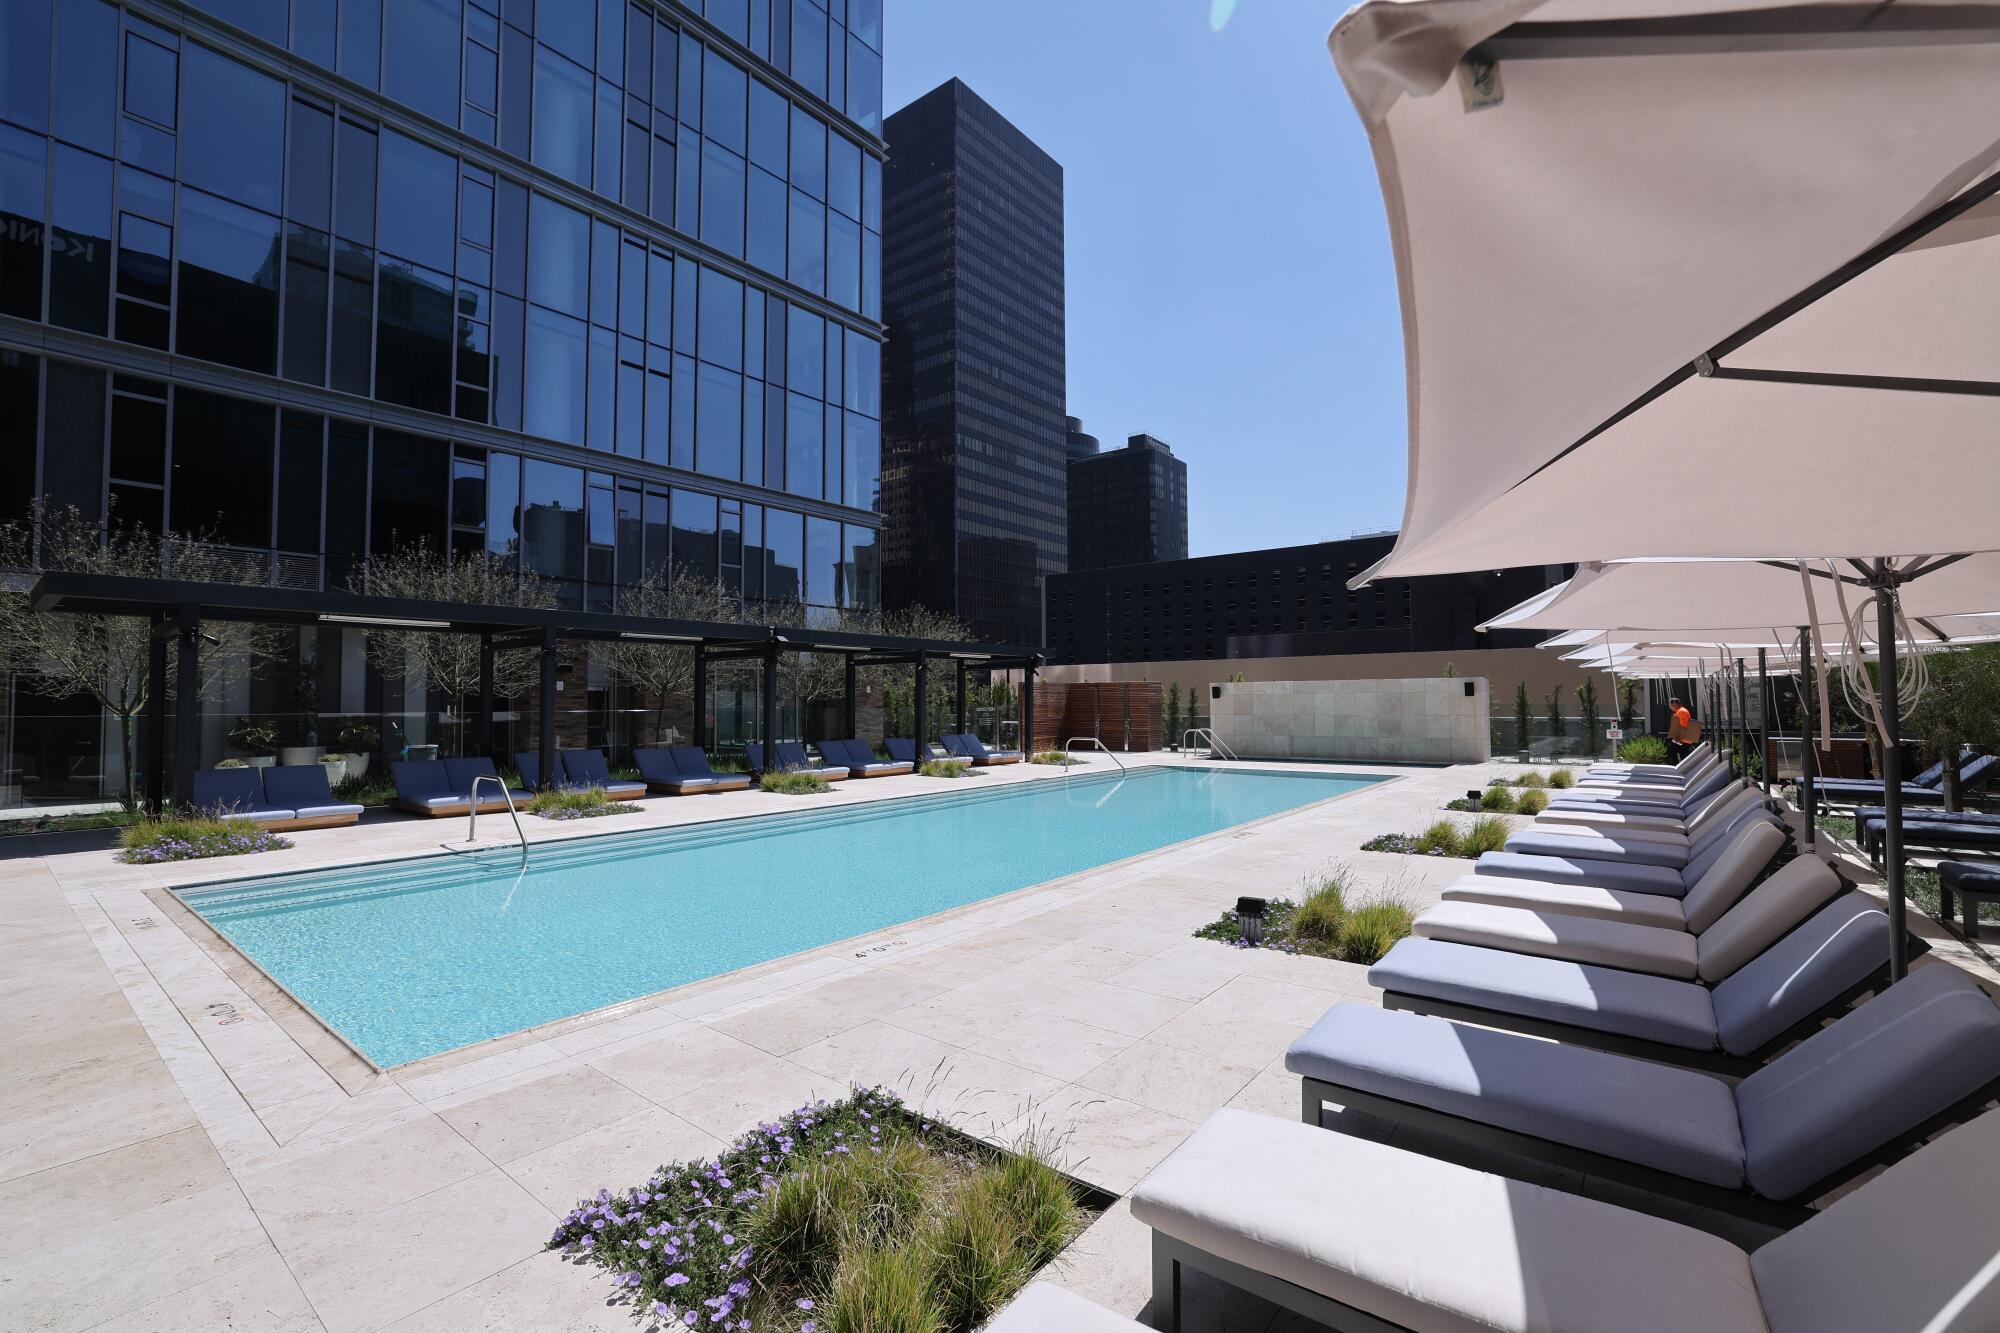 Figueroa Eight features a rooftop saltwater pool with furnished cabanas and poolside bar in downtown Los Angeles.